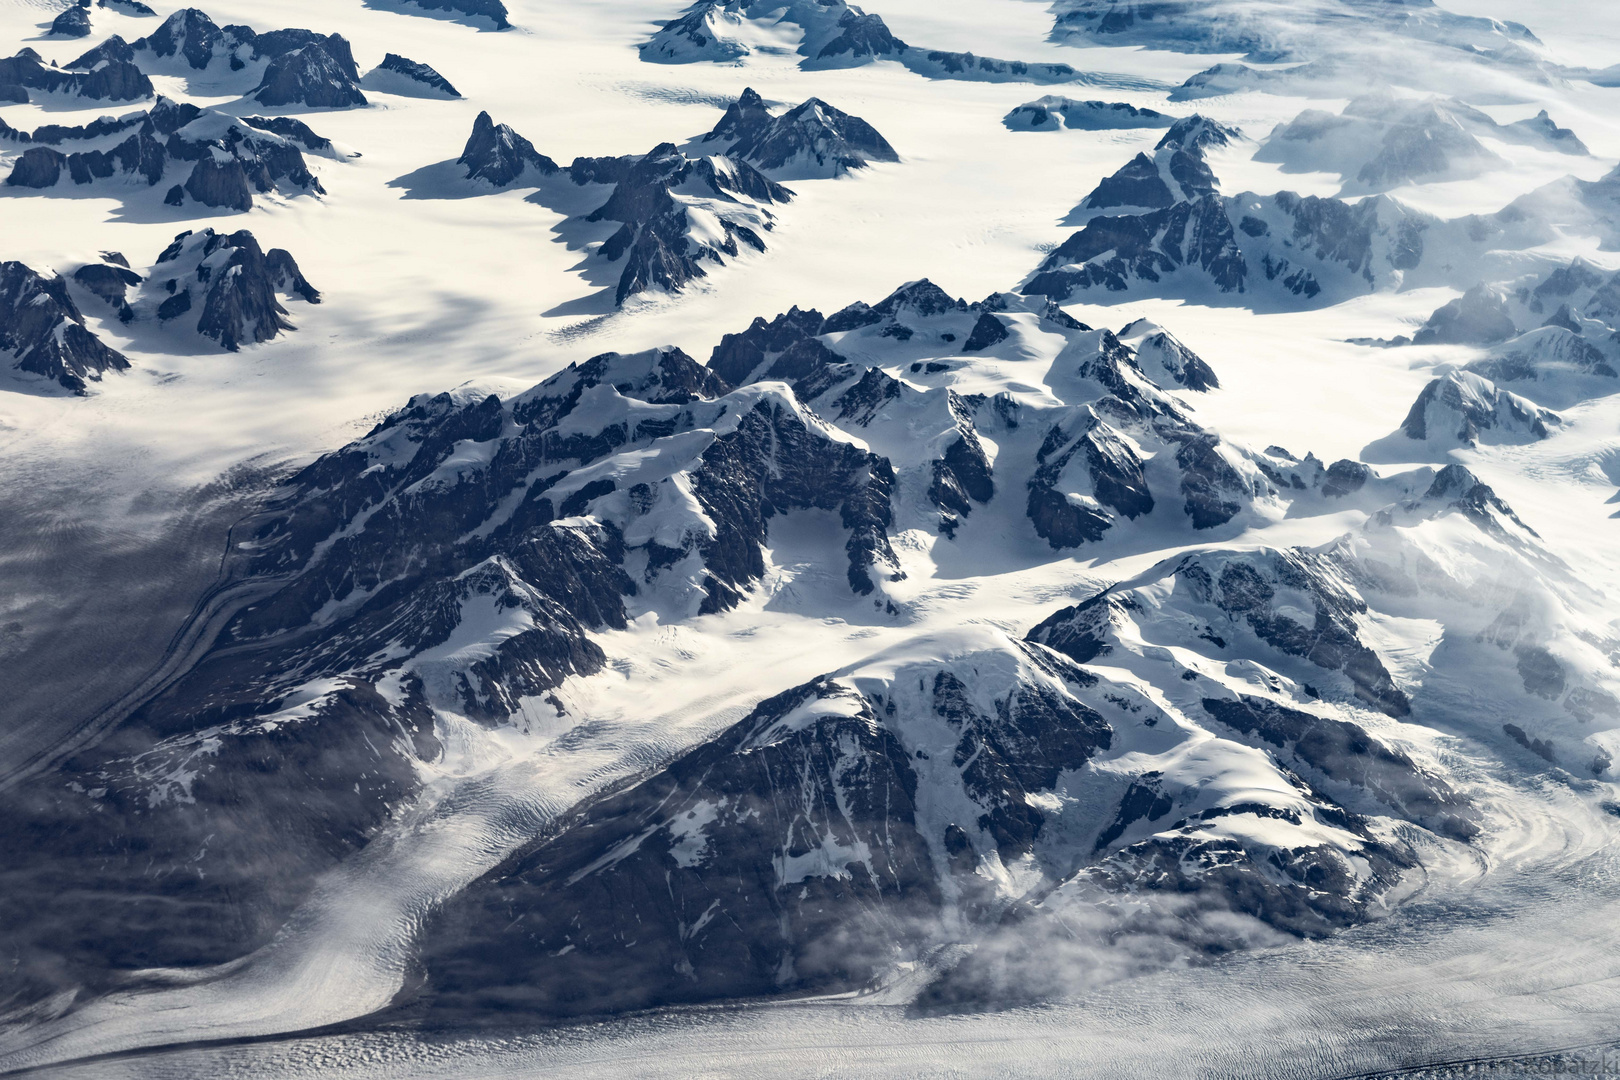 Greenland from above (4)